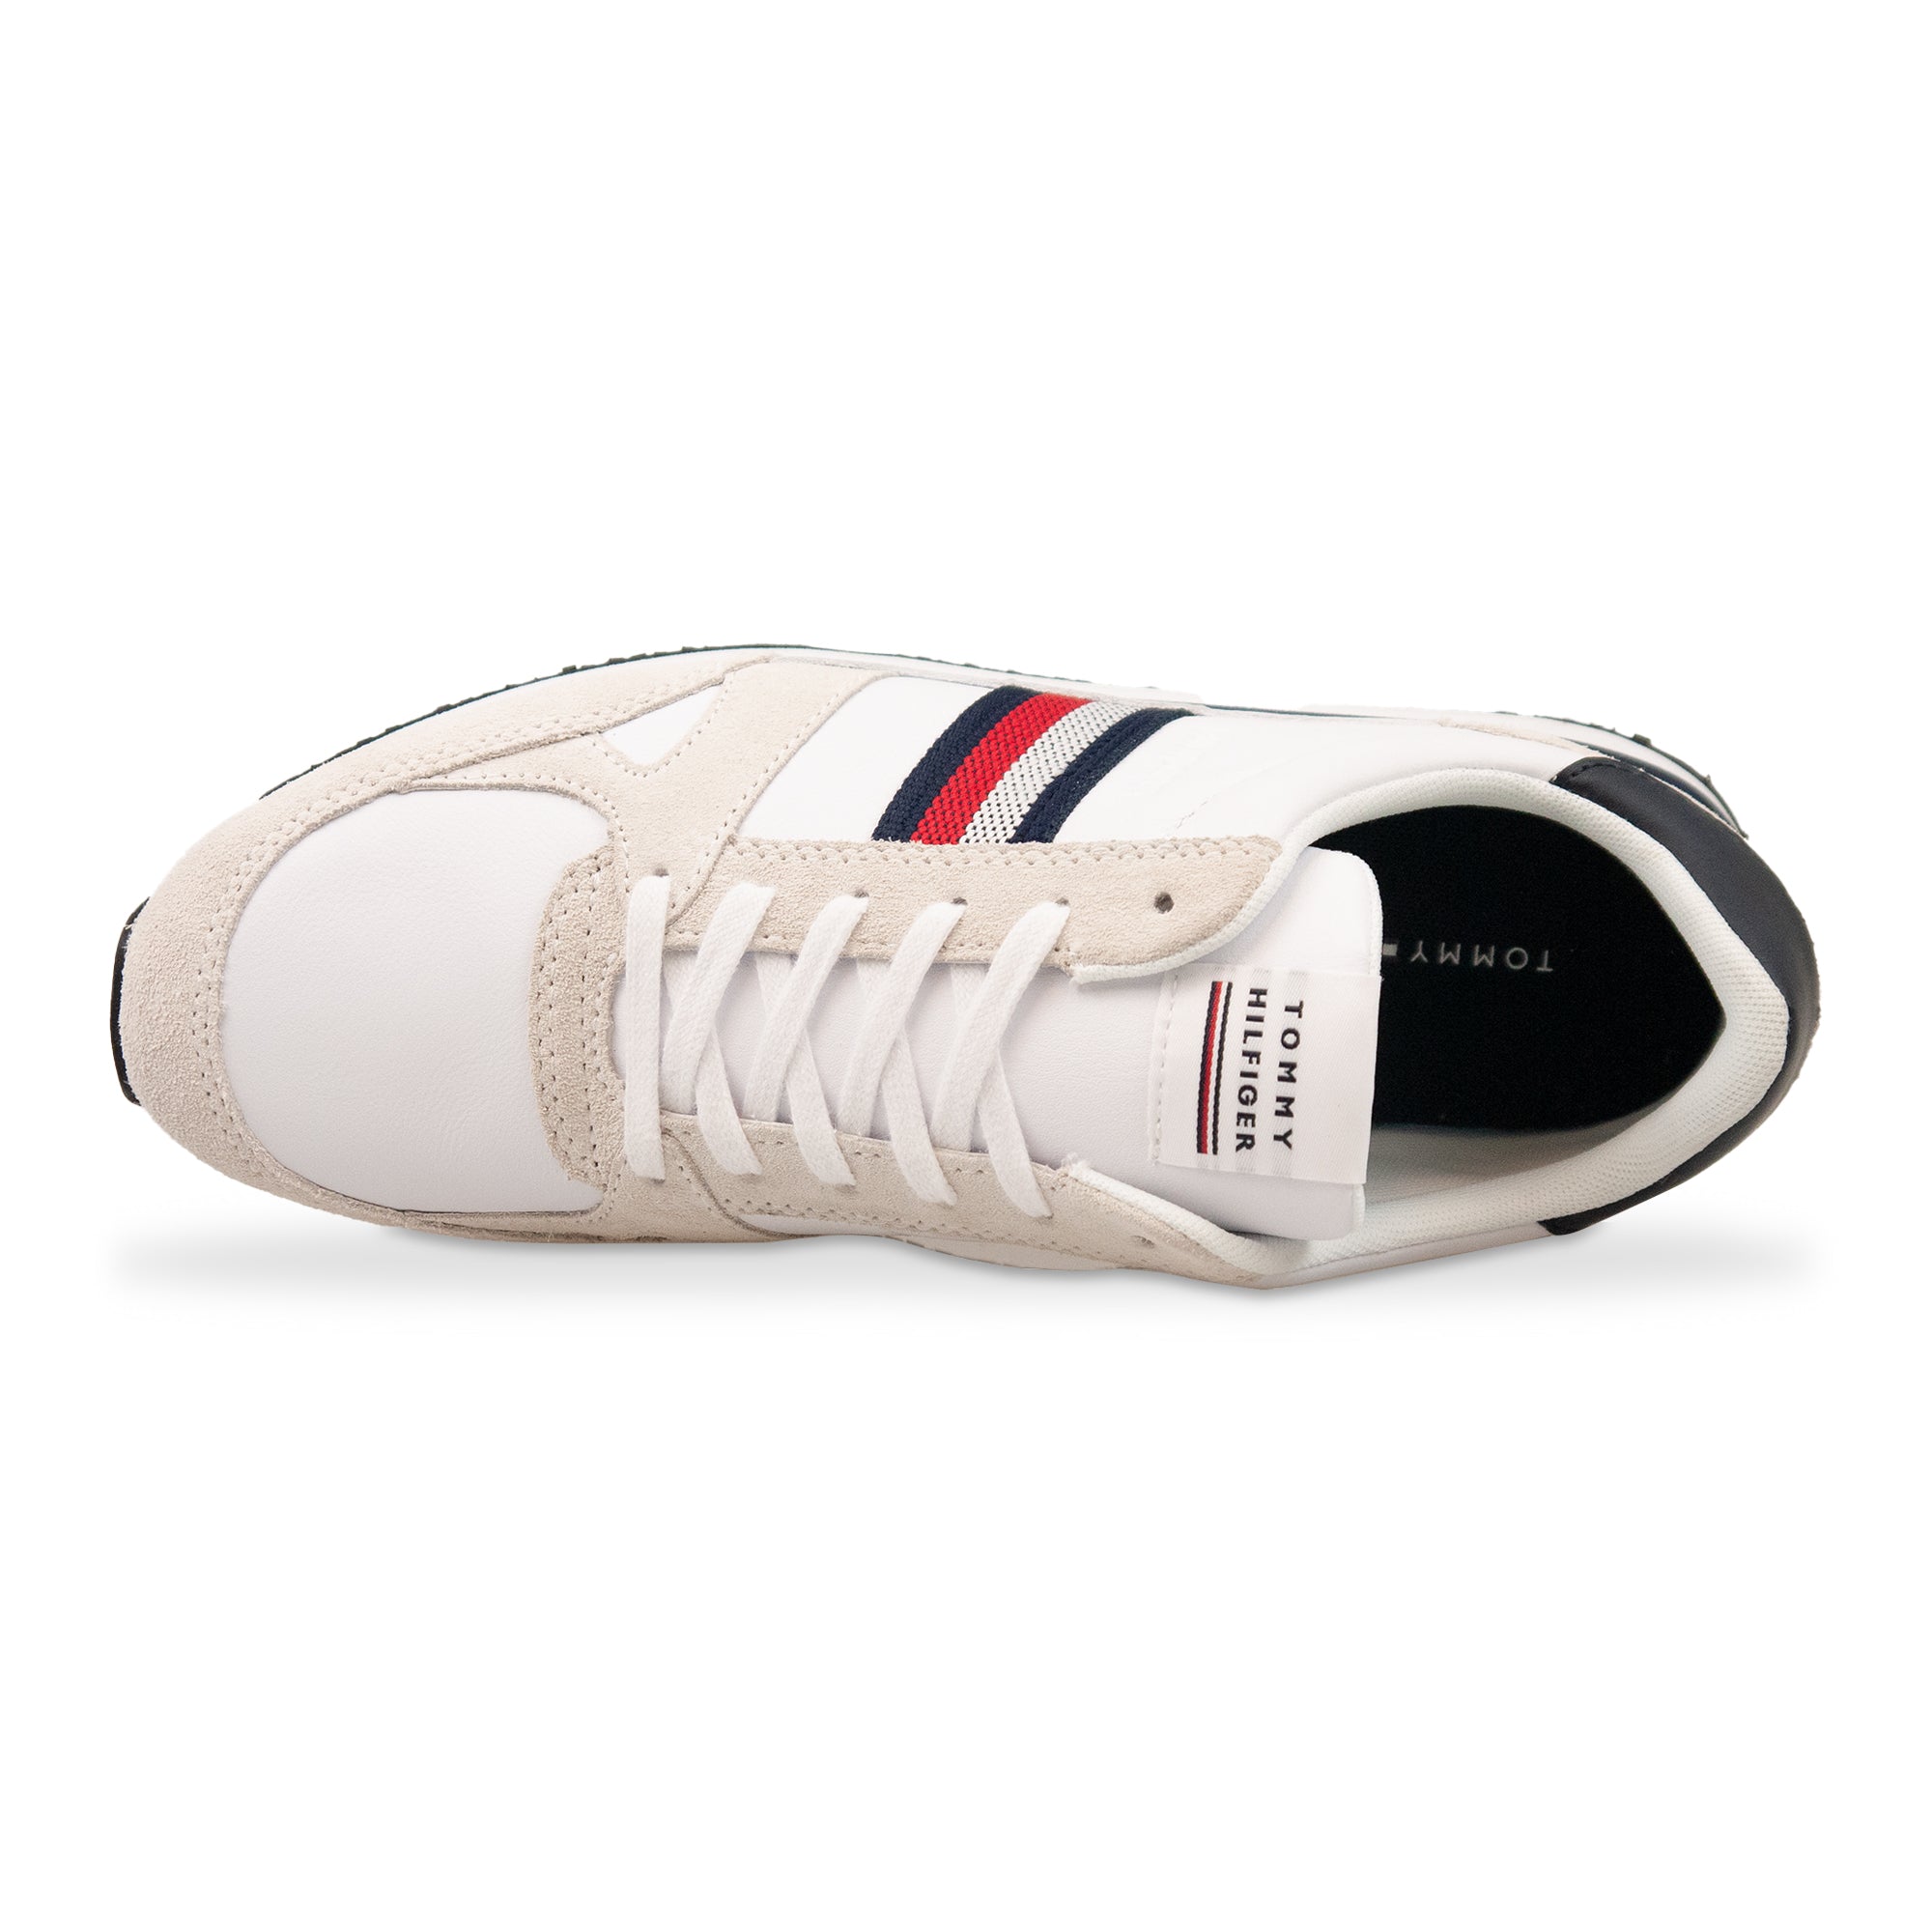 Tommy Hilfiger Leather Stripe Trainers - White